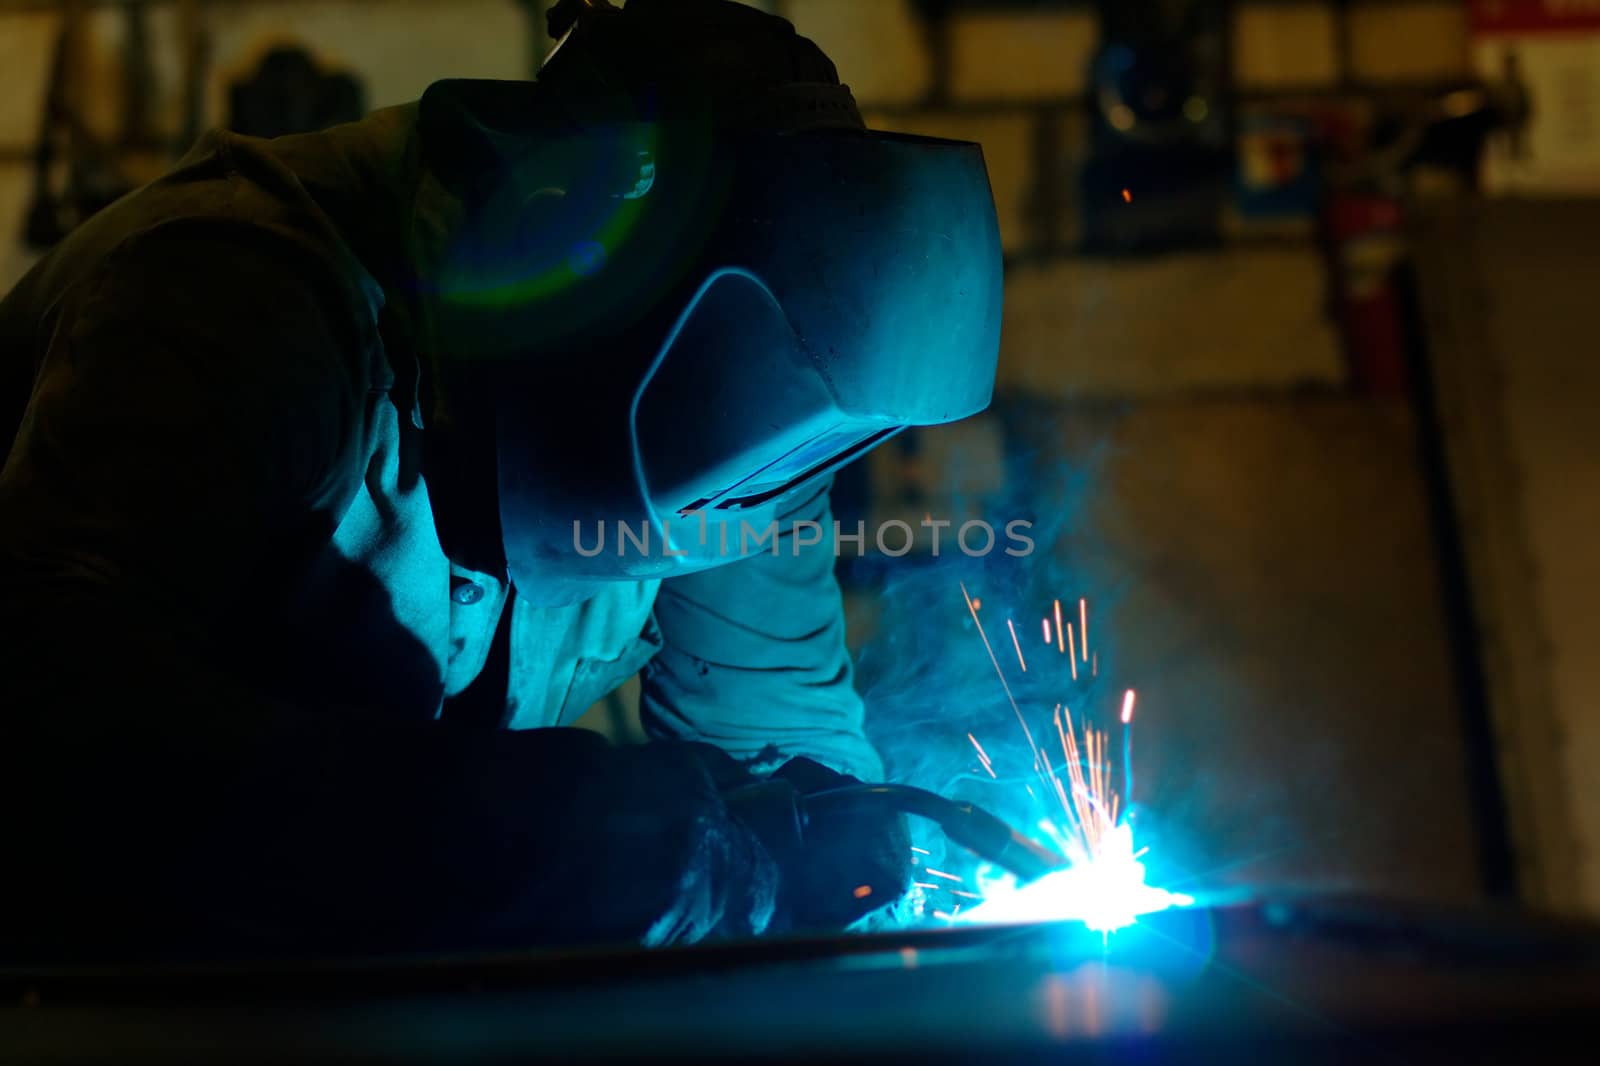 Close-up photo of a welder at work with sparks flying around